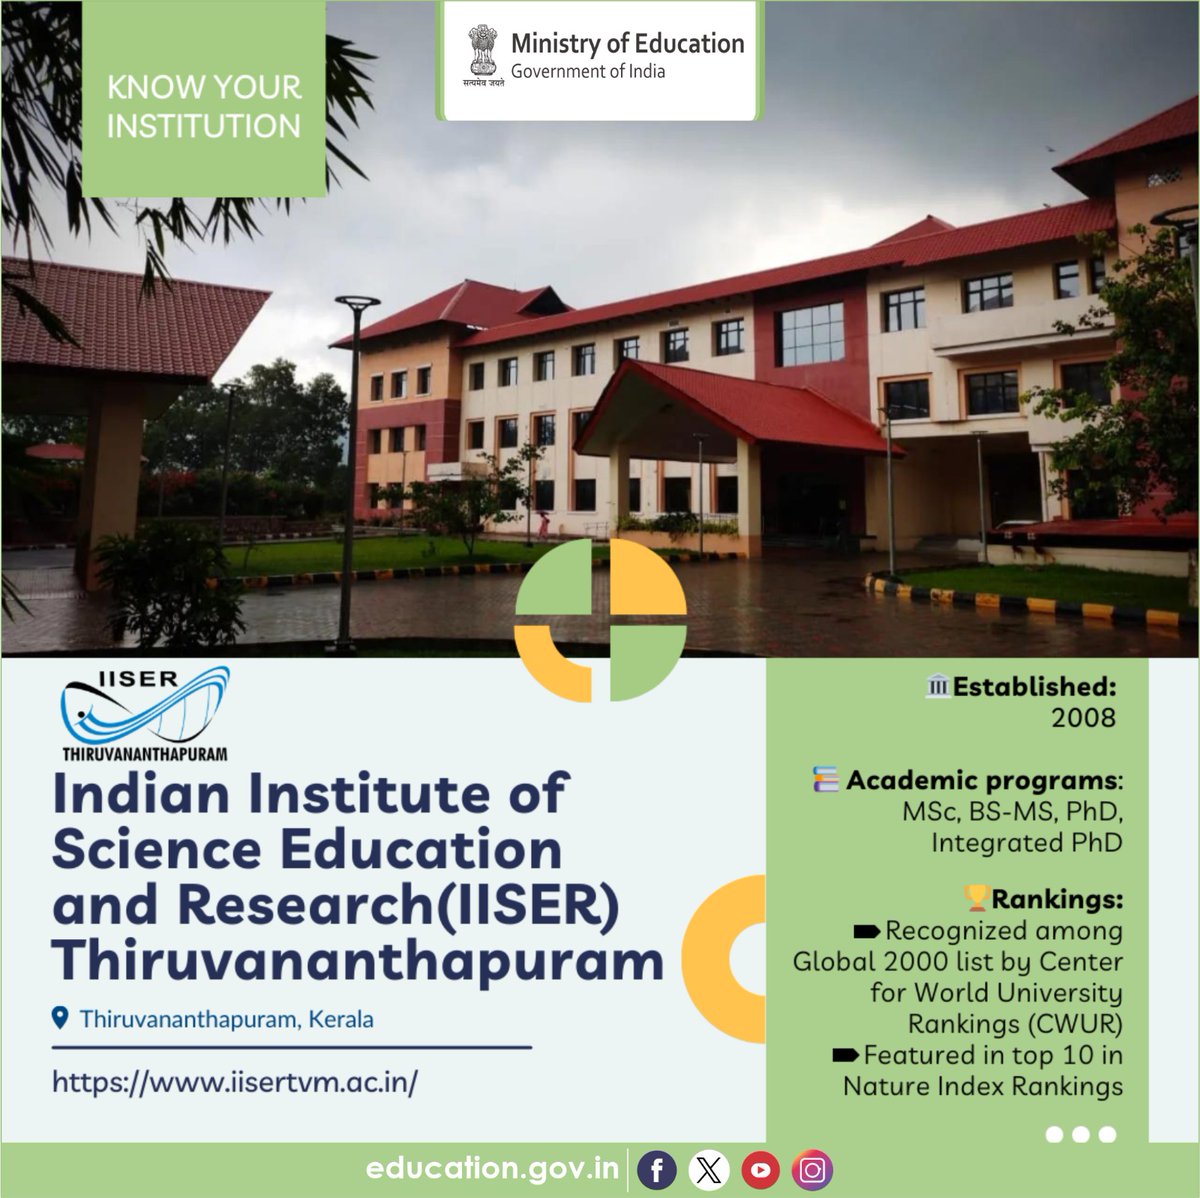 Know about the HEIs of India! Established in 2008, Indian Institute of Science Education and Research Thiruvananthapuram (IISER TVM) adheres to global standards in scientific research and education. Faculty members conduct pioneering research in basic sciences, utilizing